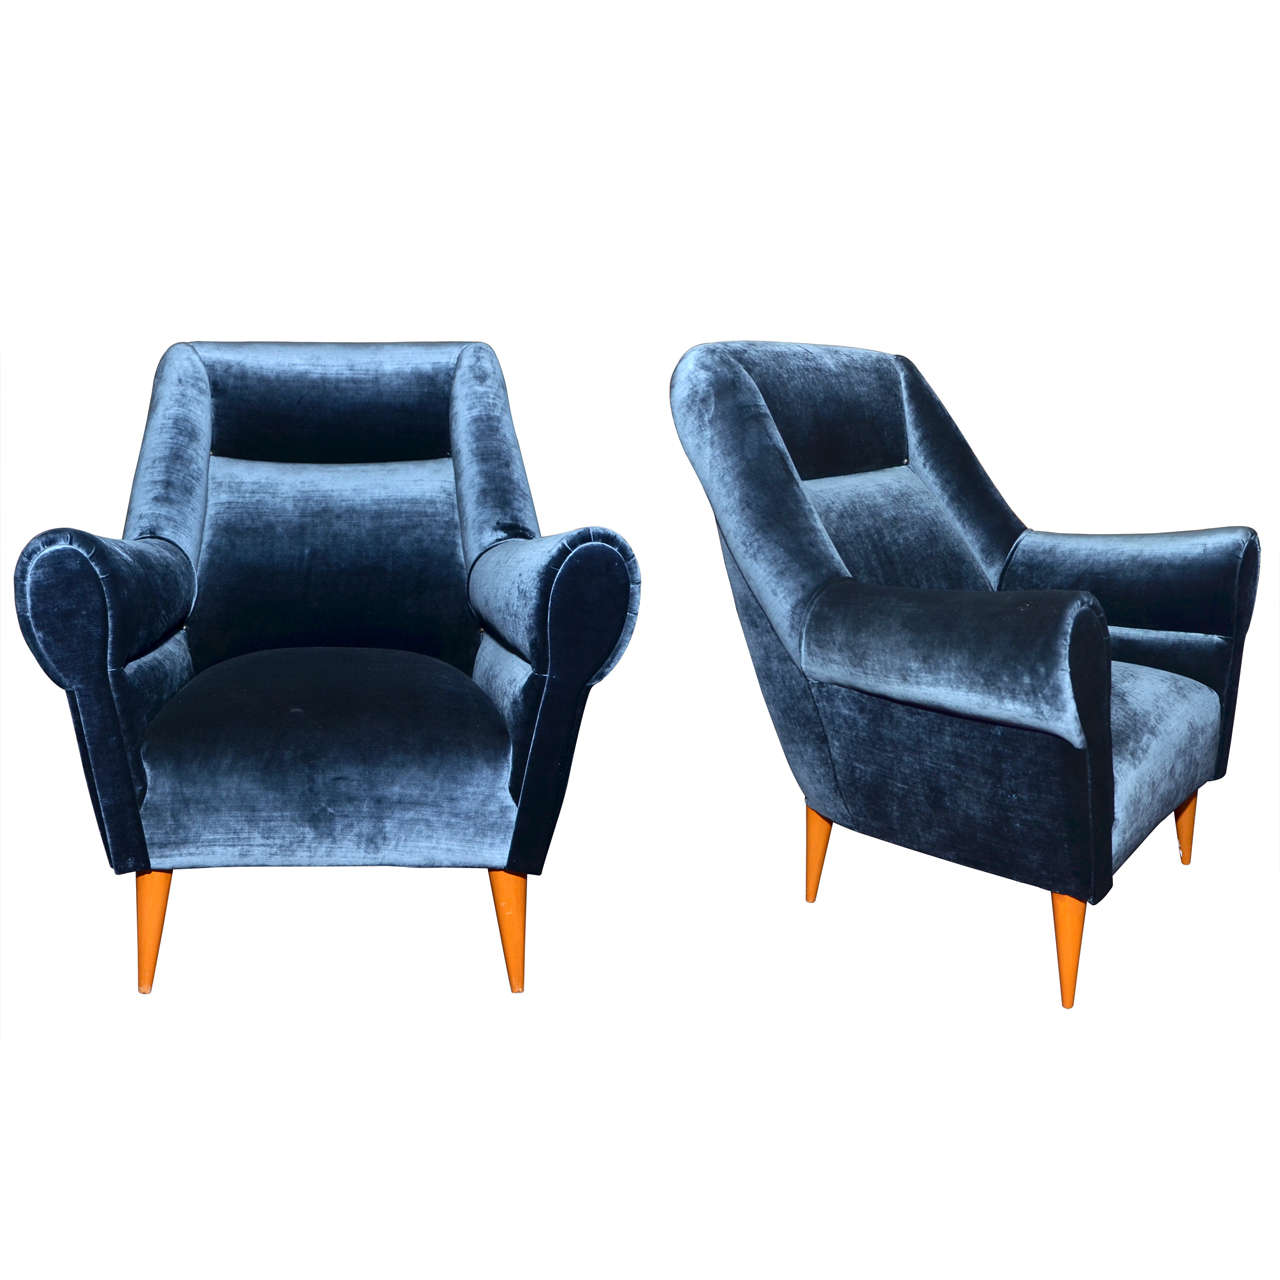 Two 1950s Italian Armchairs For Sale